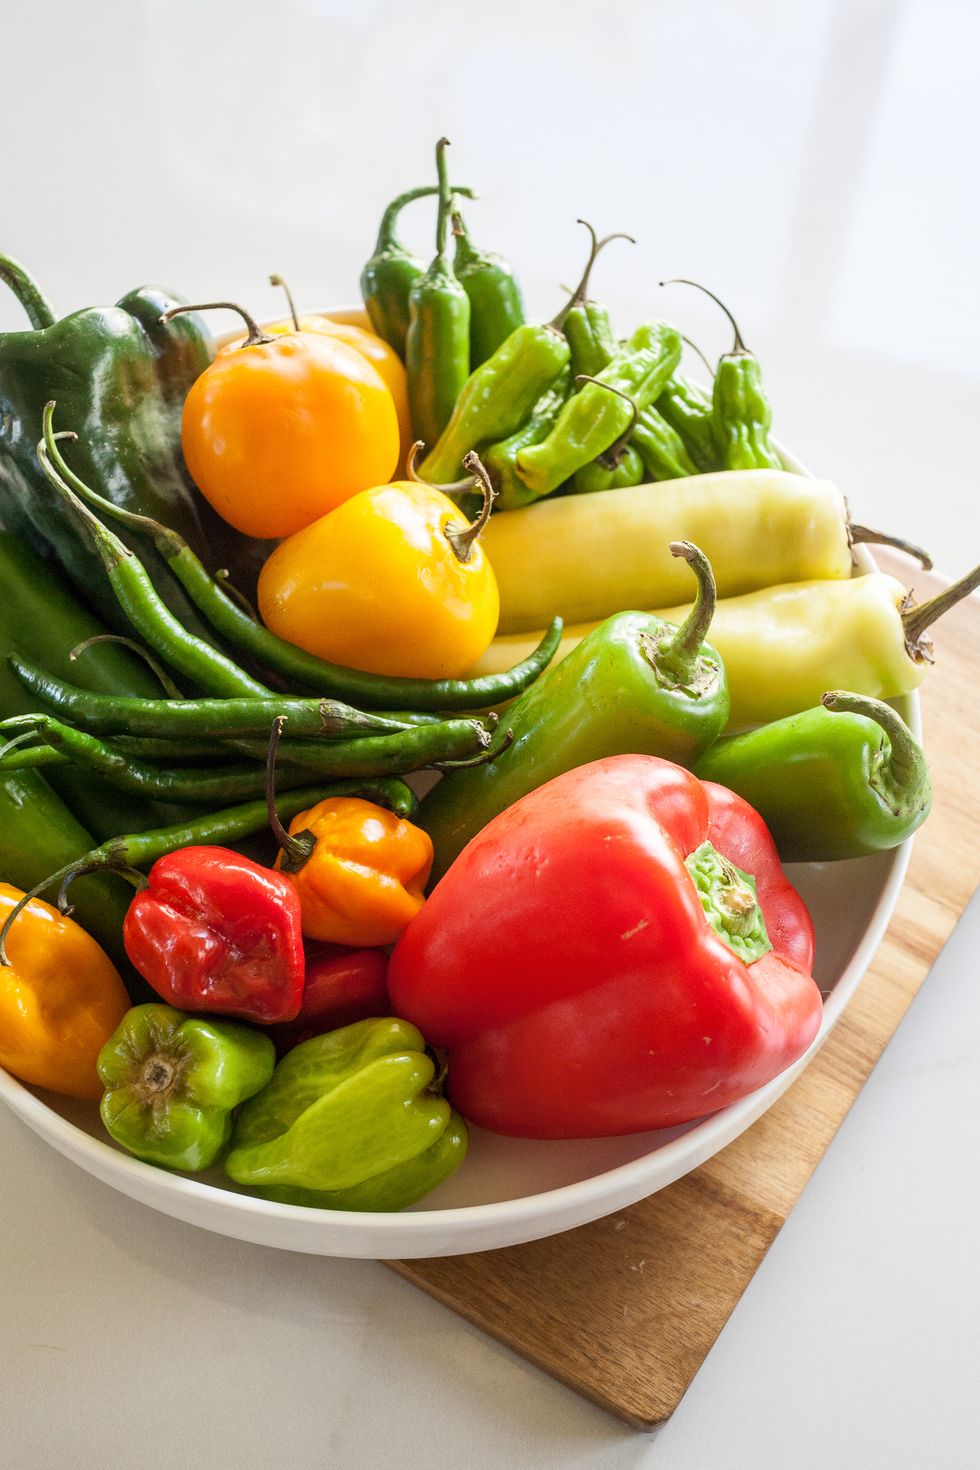 Hot Peppers 101